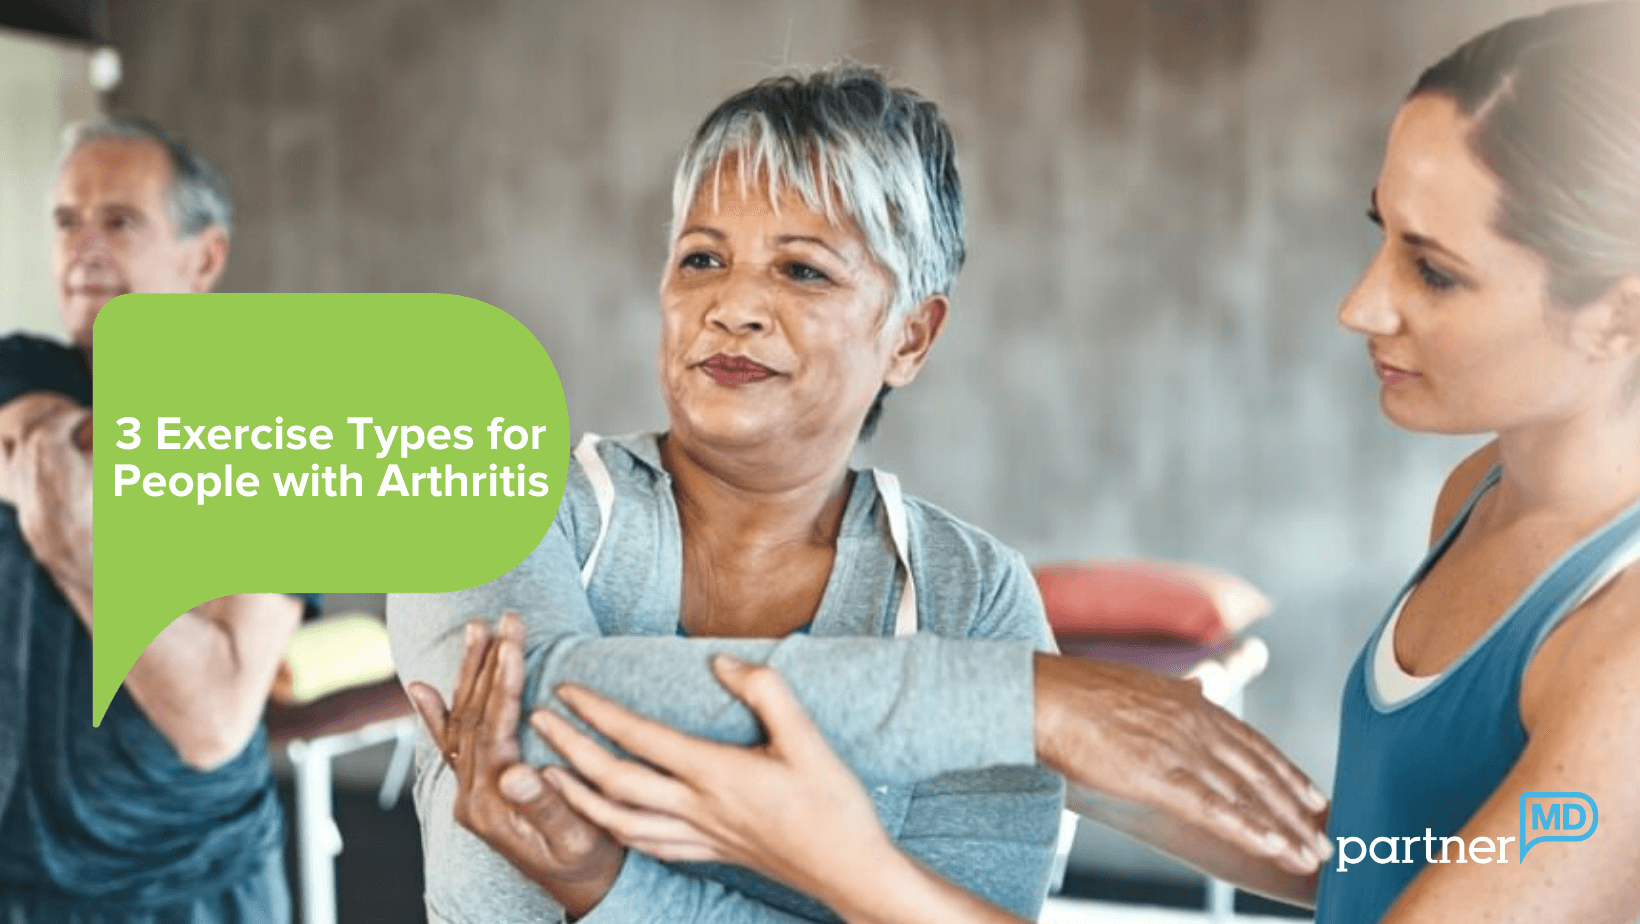 3 Exercise Types for People with Arthritis